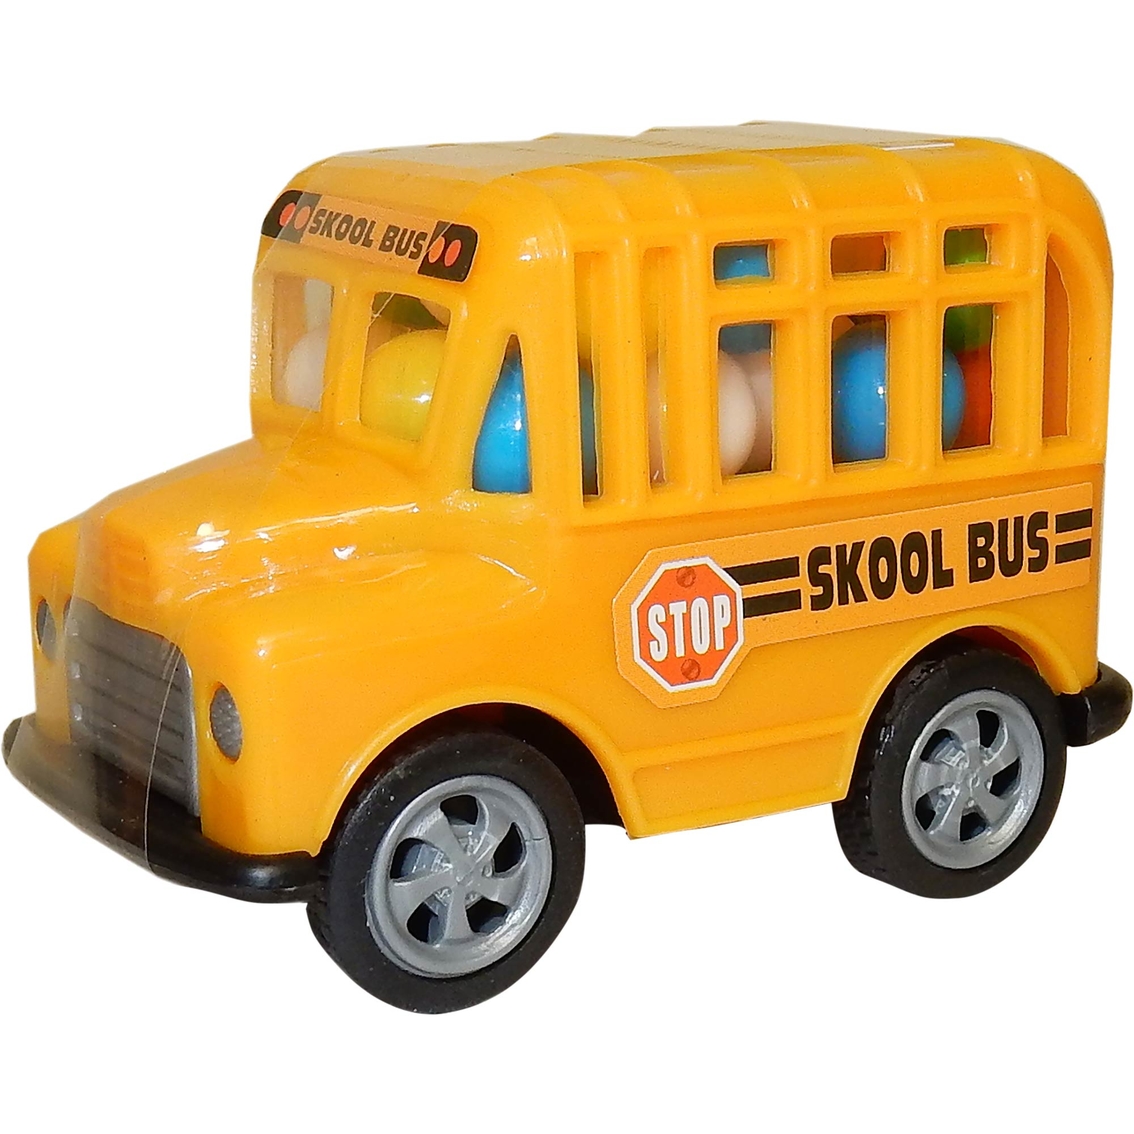 Kidsmania Toy School Bus with Candy 12 pk. - Image 2 of 2